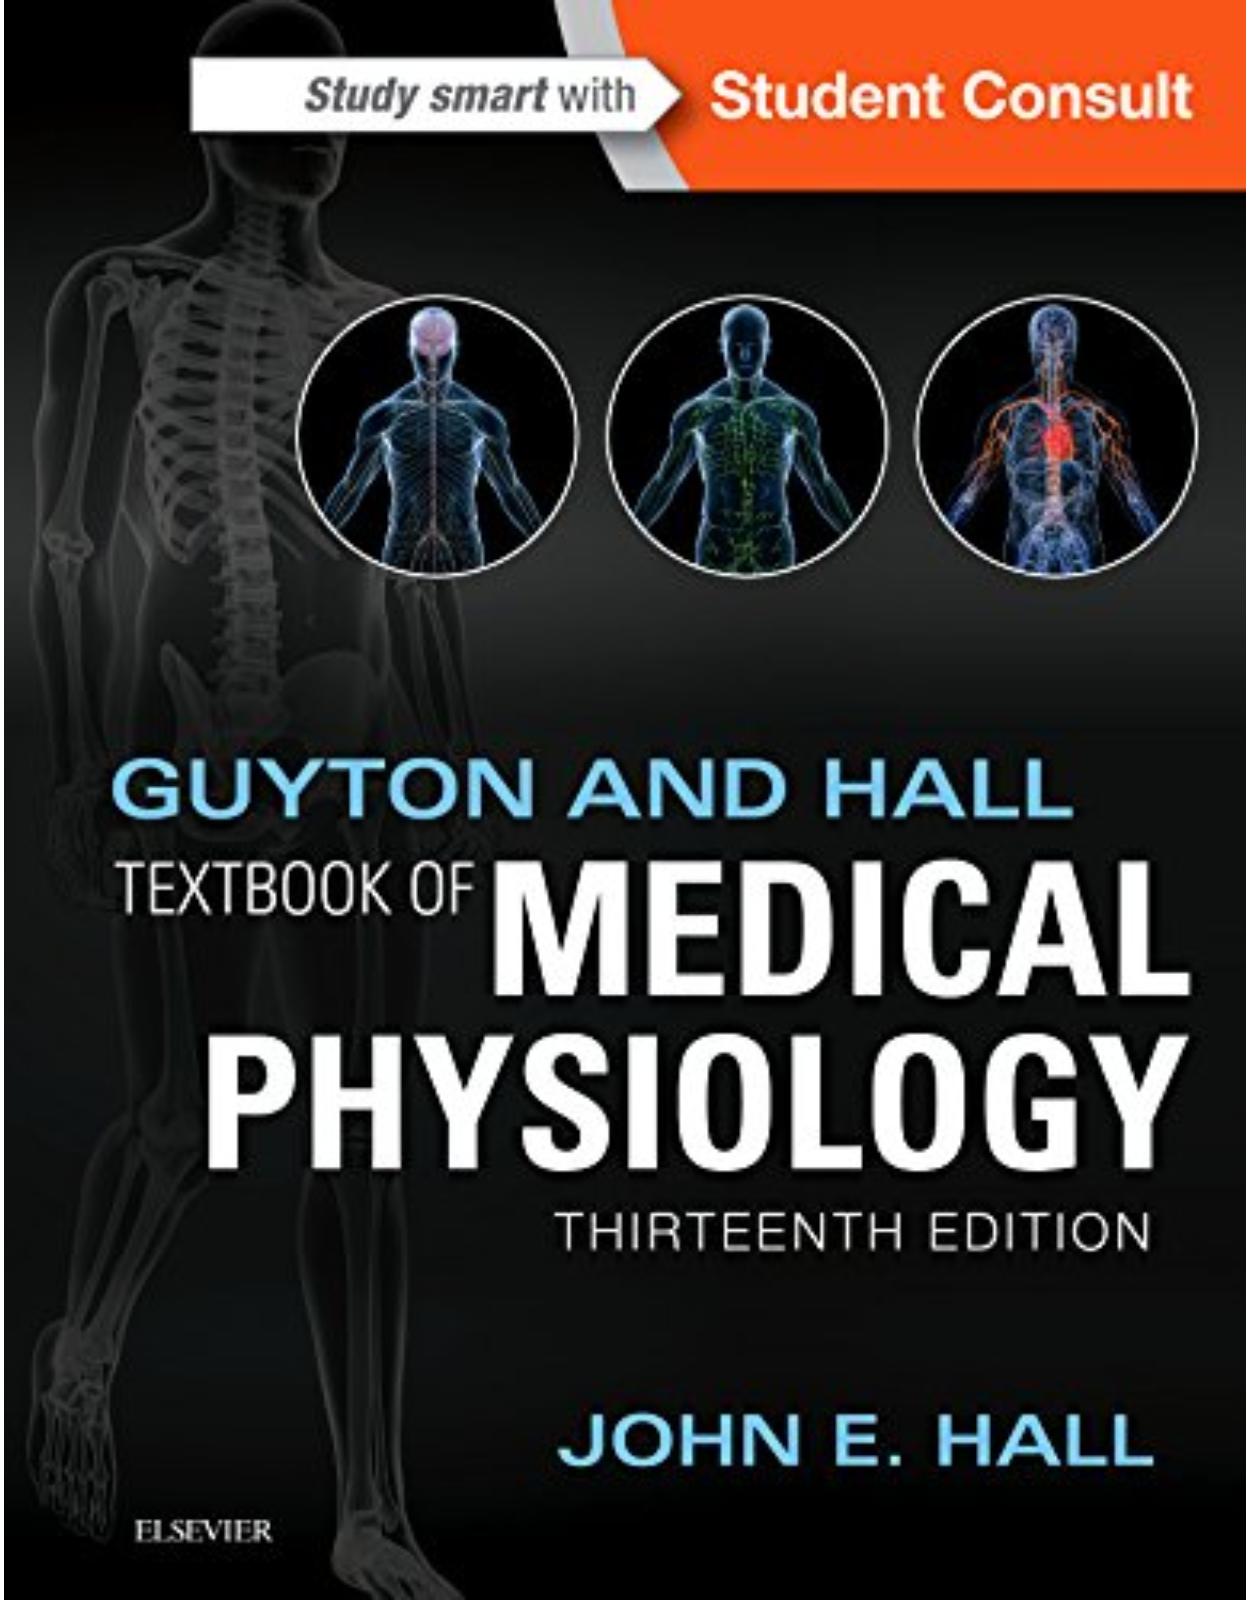 Guyton and Hall Textbook of Medical Physiology, 13e (Guyton Physiology)